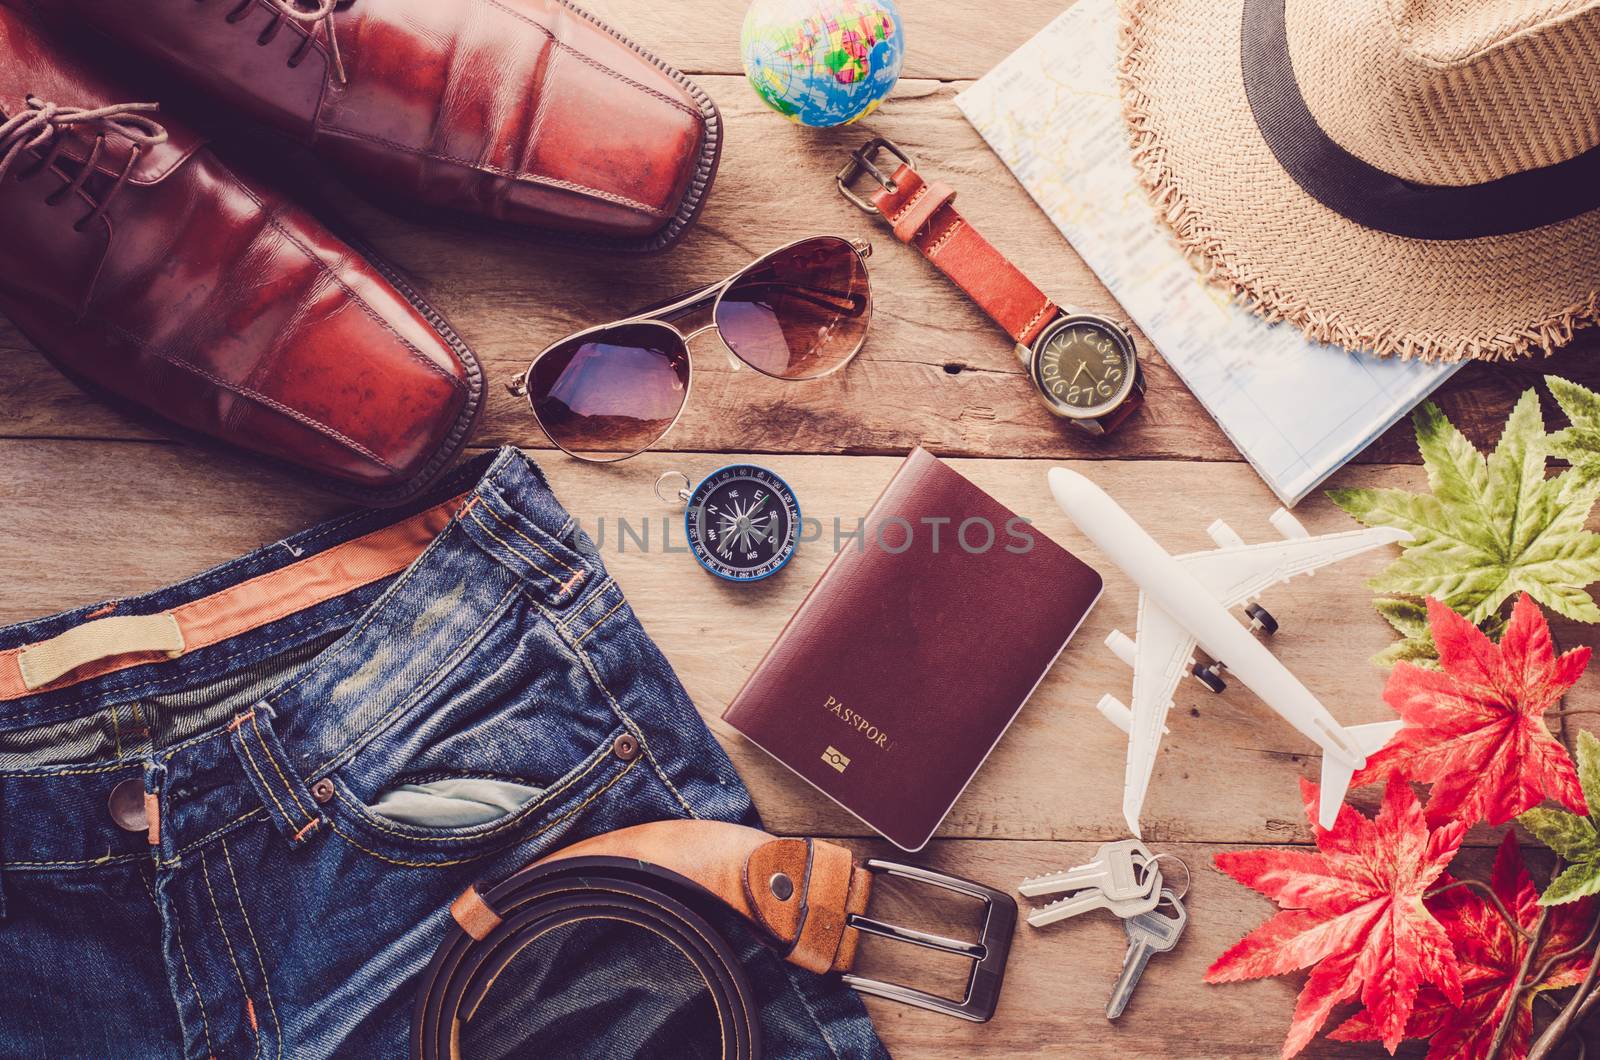 Travel accessories costumes. Passports, luggage, The cost of travel maps prepared for the trip